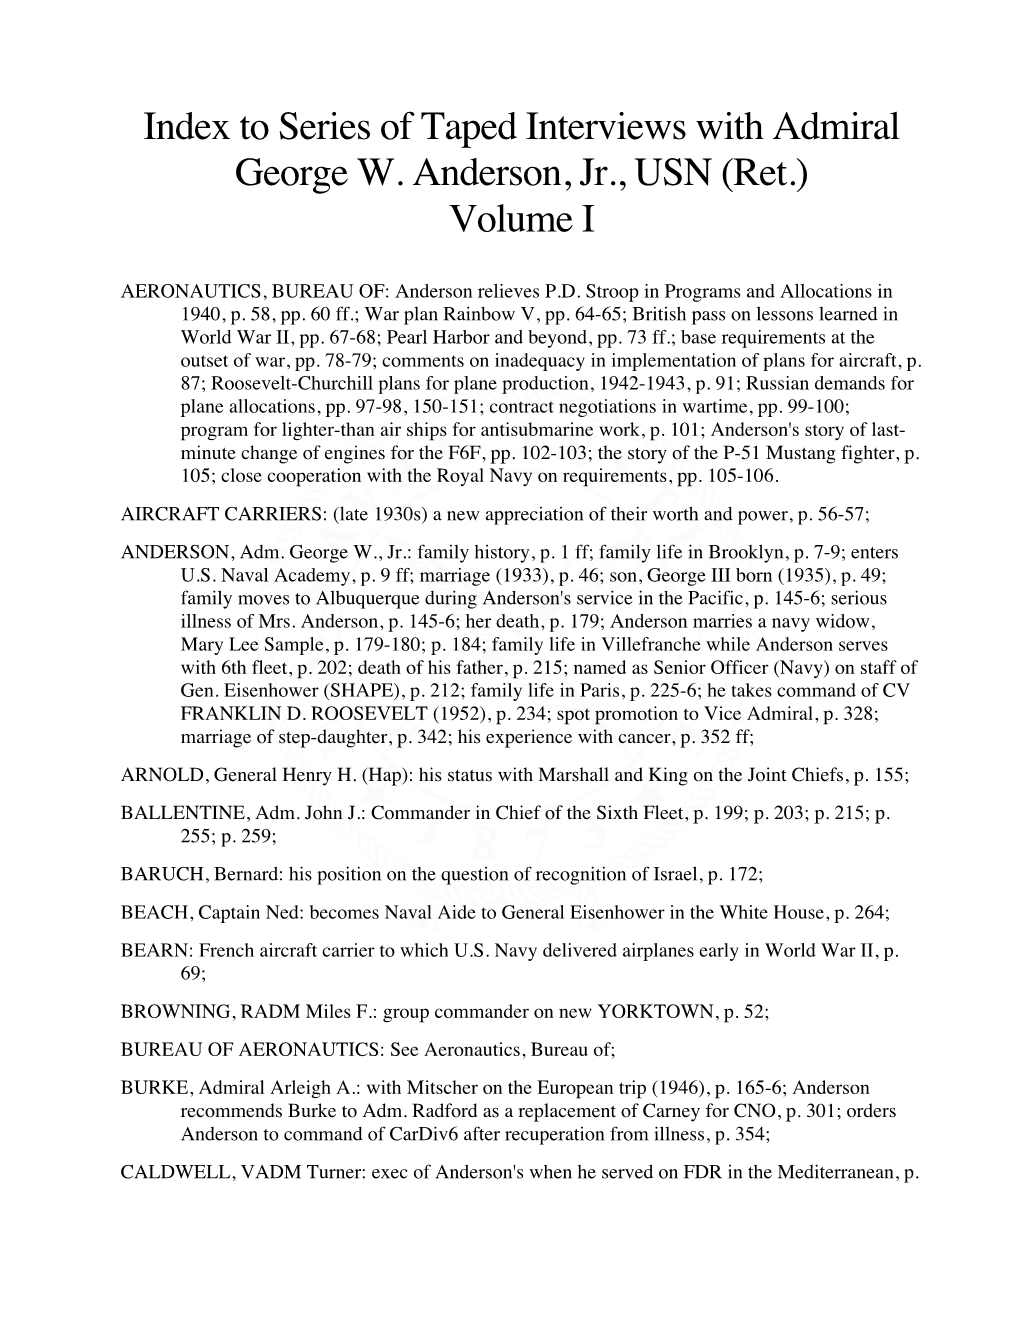 Index to Series of Taped Interviews with Admiral George W. Anderson, Jr., USN (Ret.) Volume I